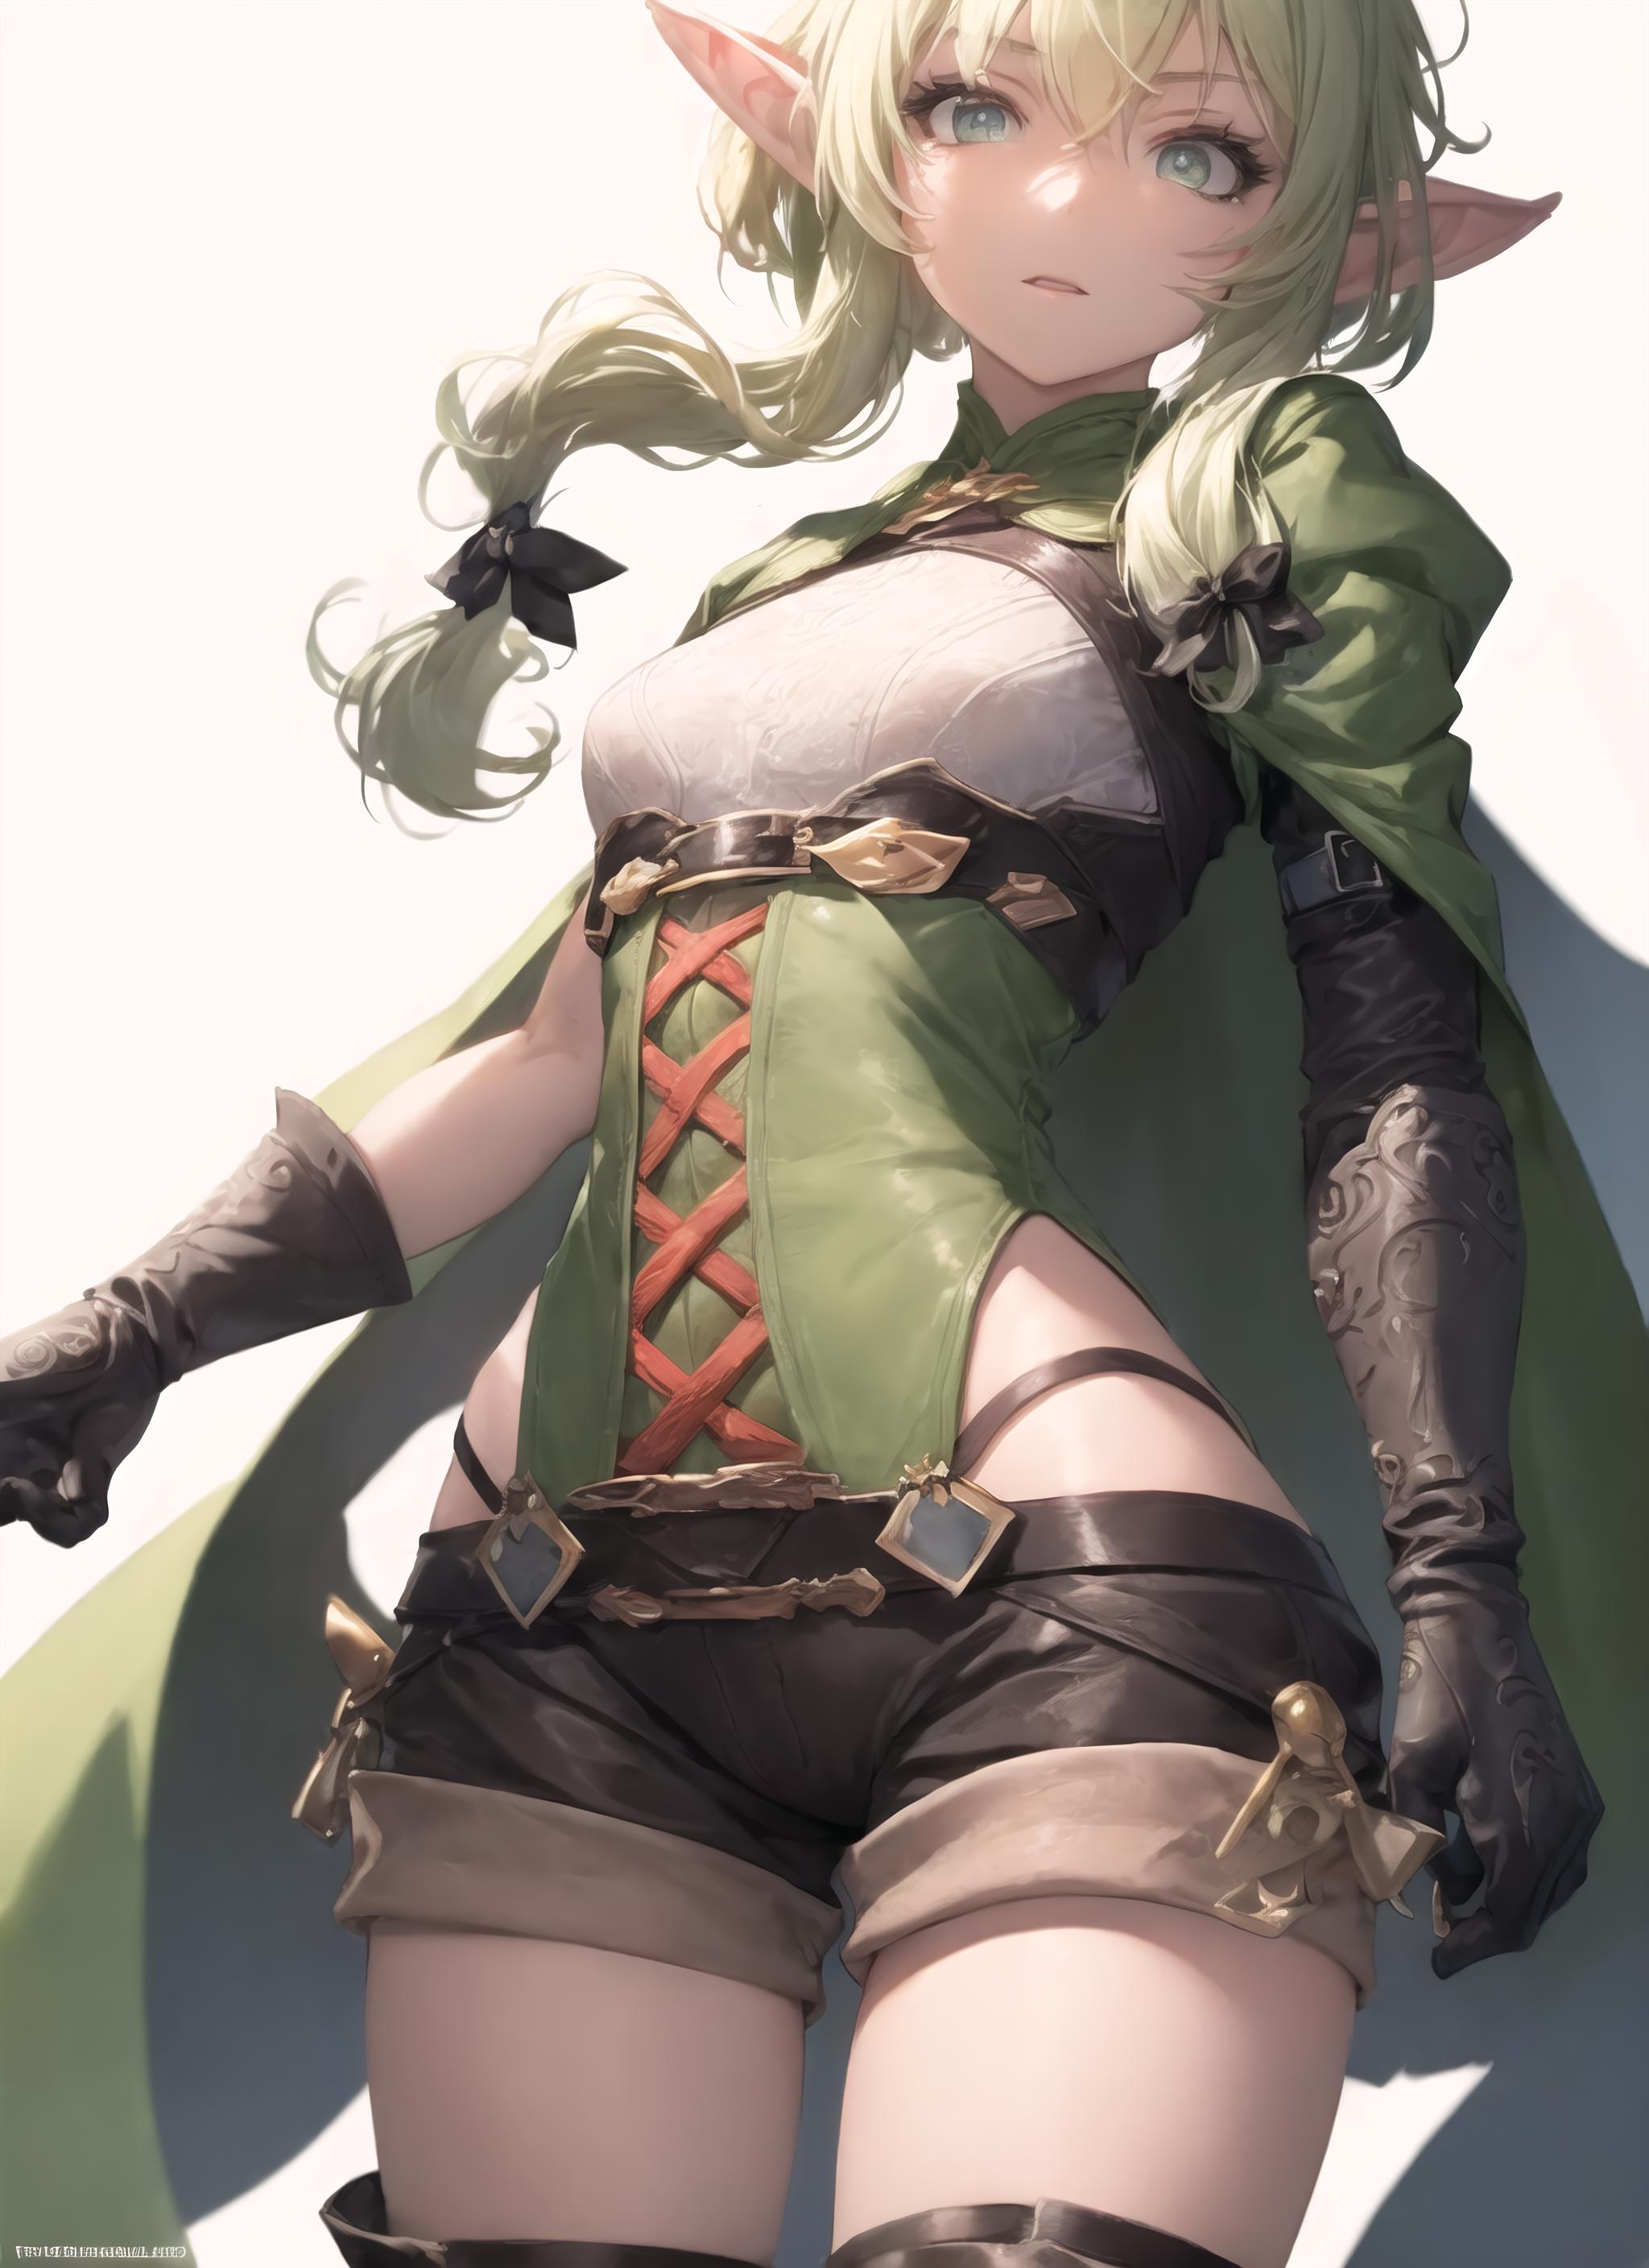 High Elf Archer Goblin Slayer | Character Lora 429 image by Numeratic